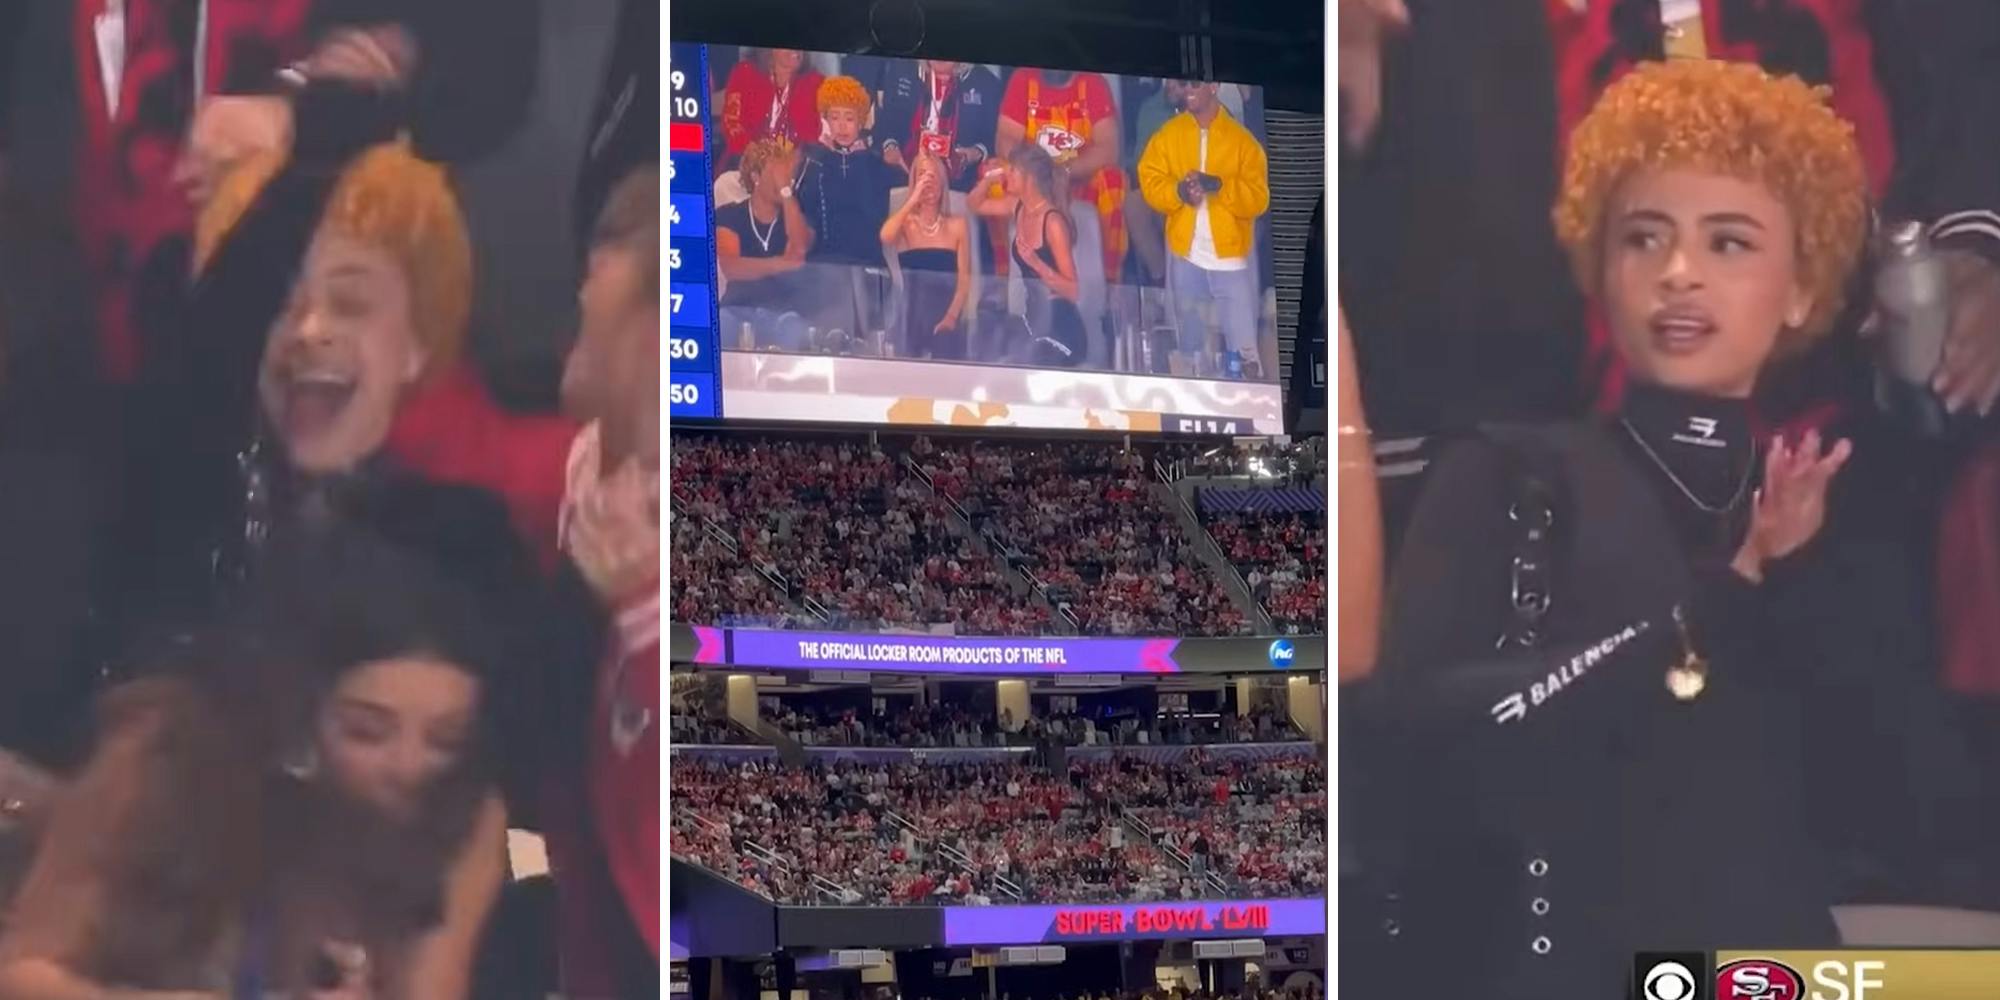 Conspiracists use video of Ice Spice at the Super Bowl to suggest she is a demon